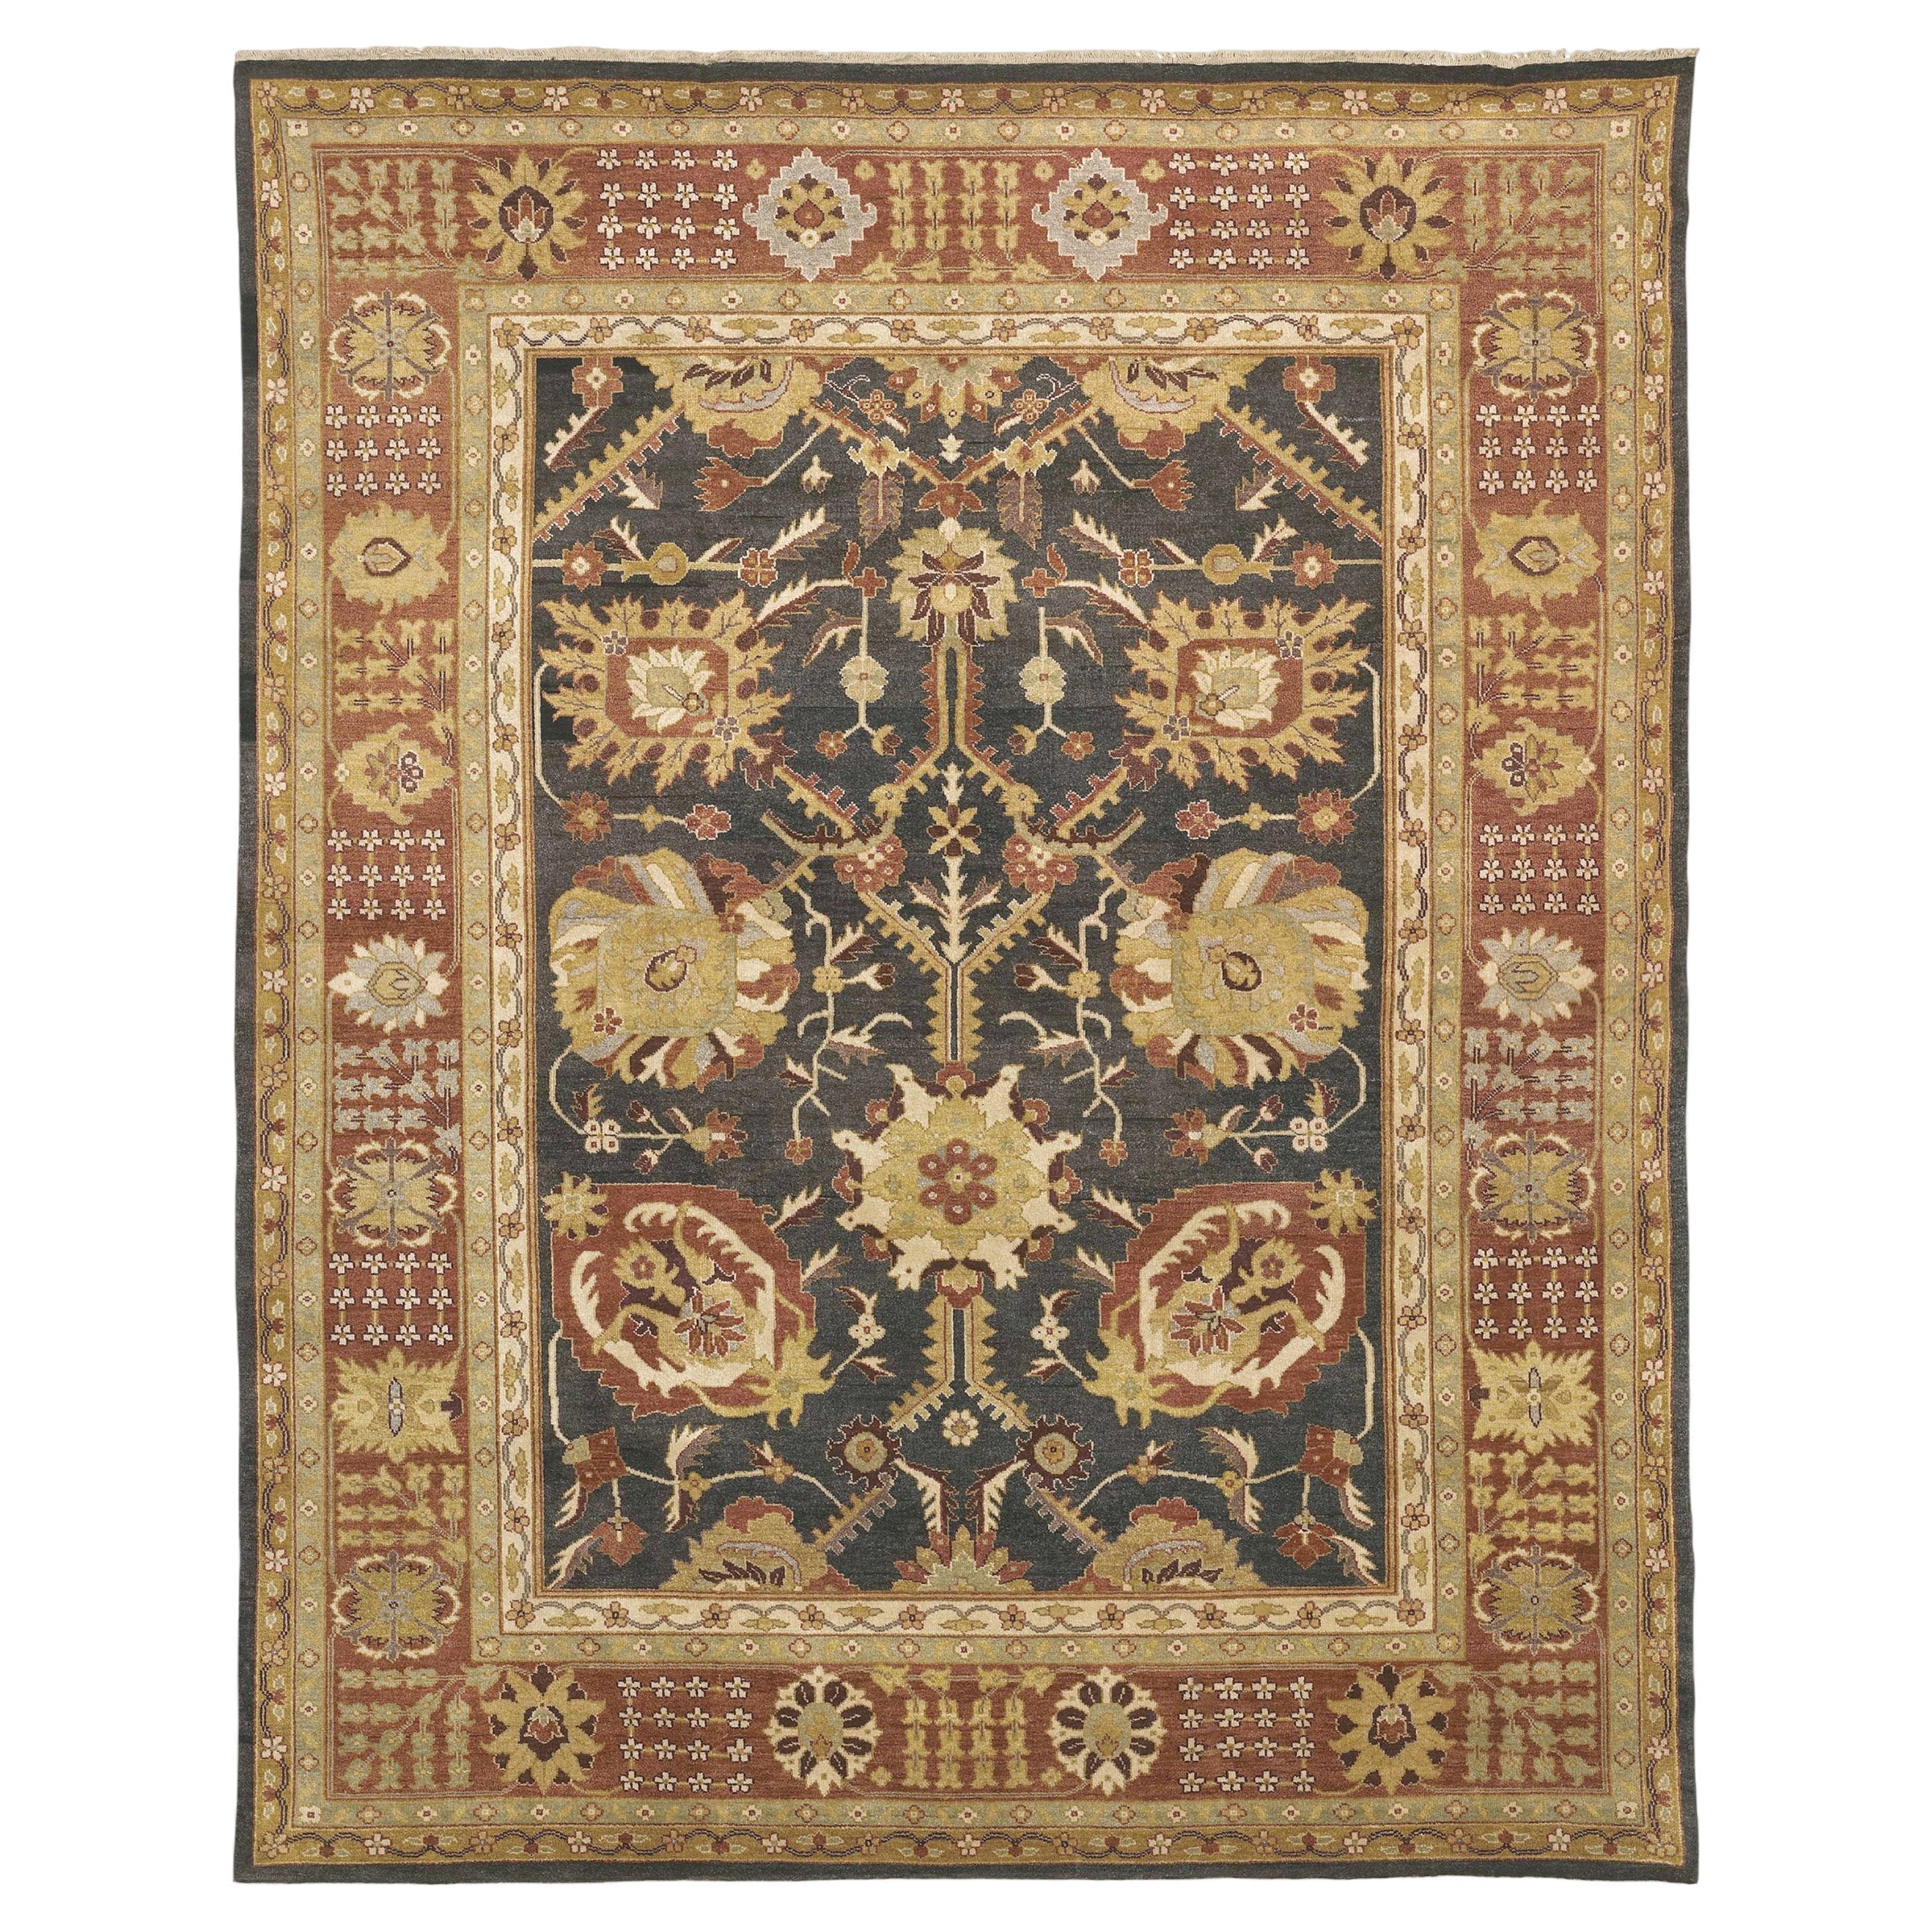 Luxury Traditional Hand-Knotted Tabriz Brown/Rust 10x14 Rug